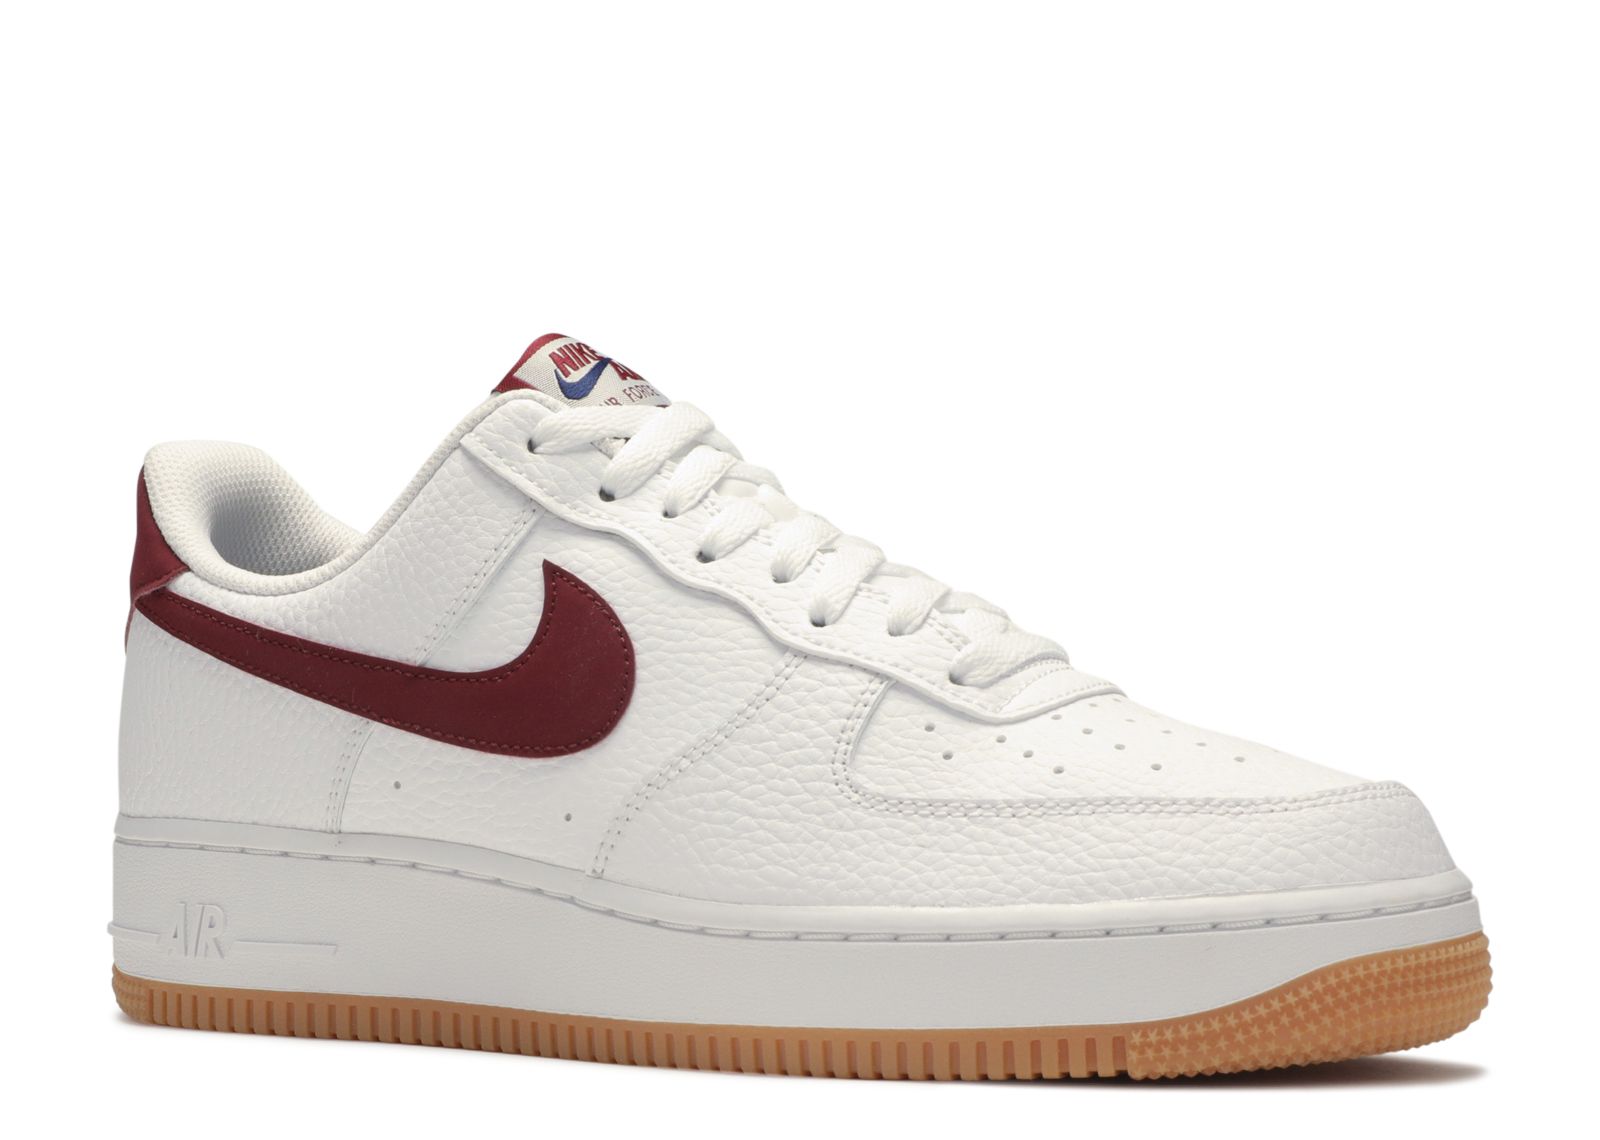 white red and blue air force 1